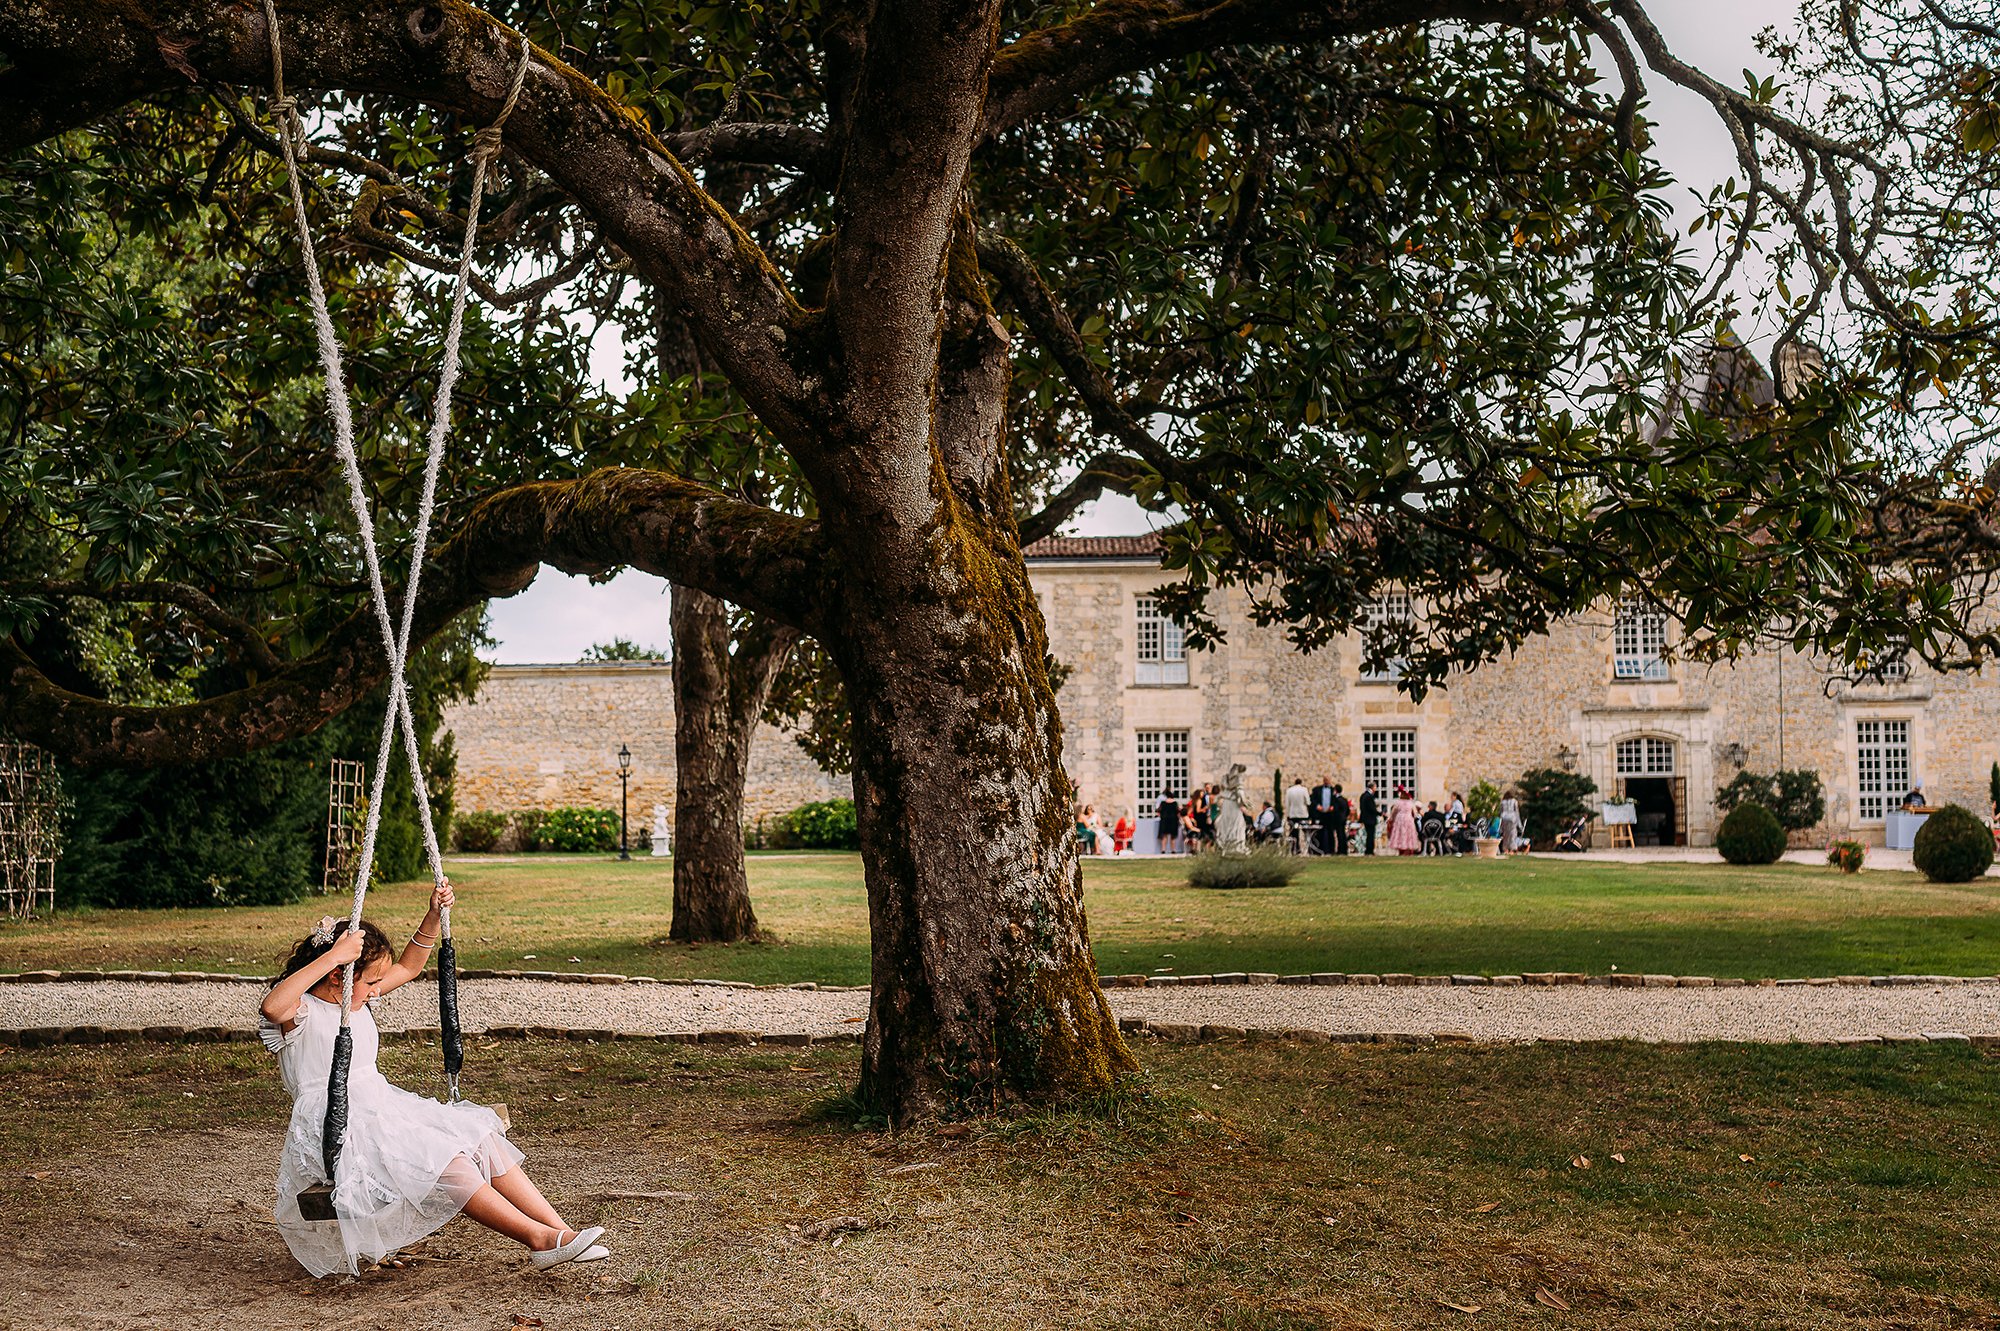  Girl on a swing outside the chateau venue in France. 